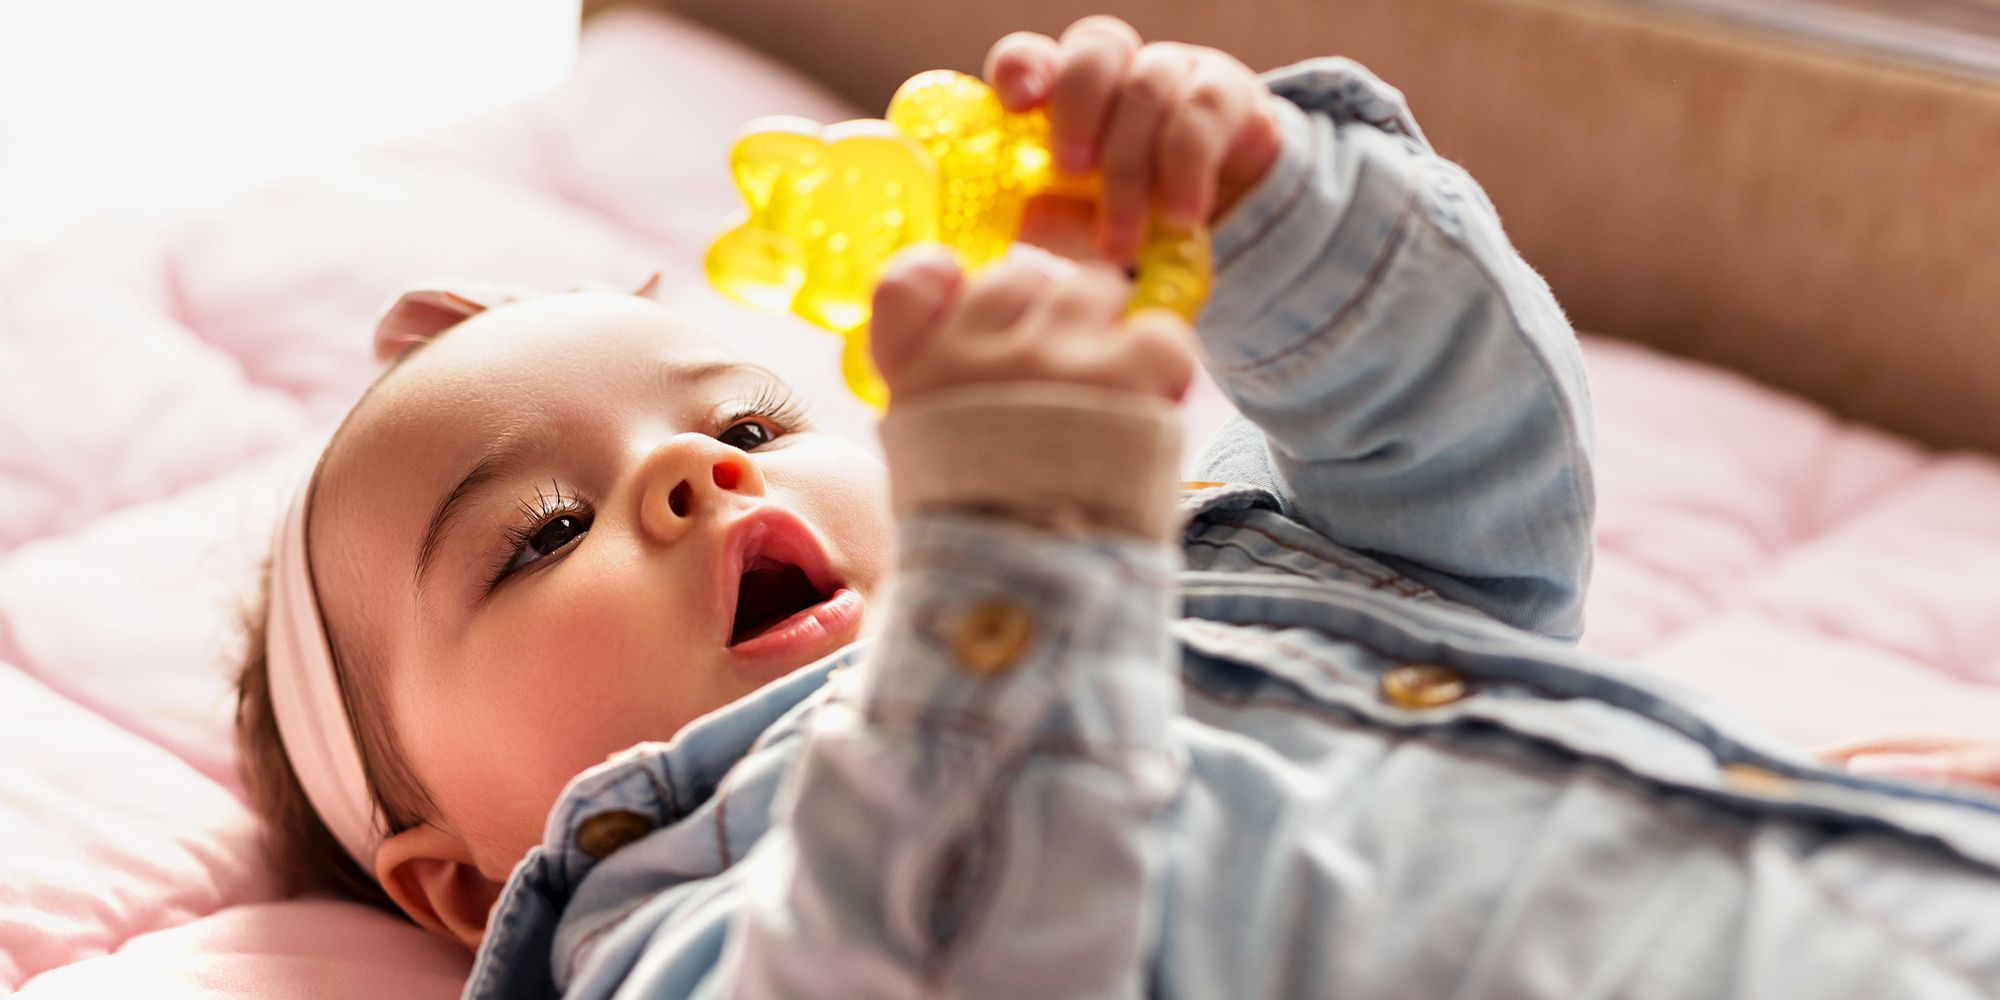 best rattle toys for babies